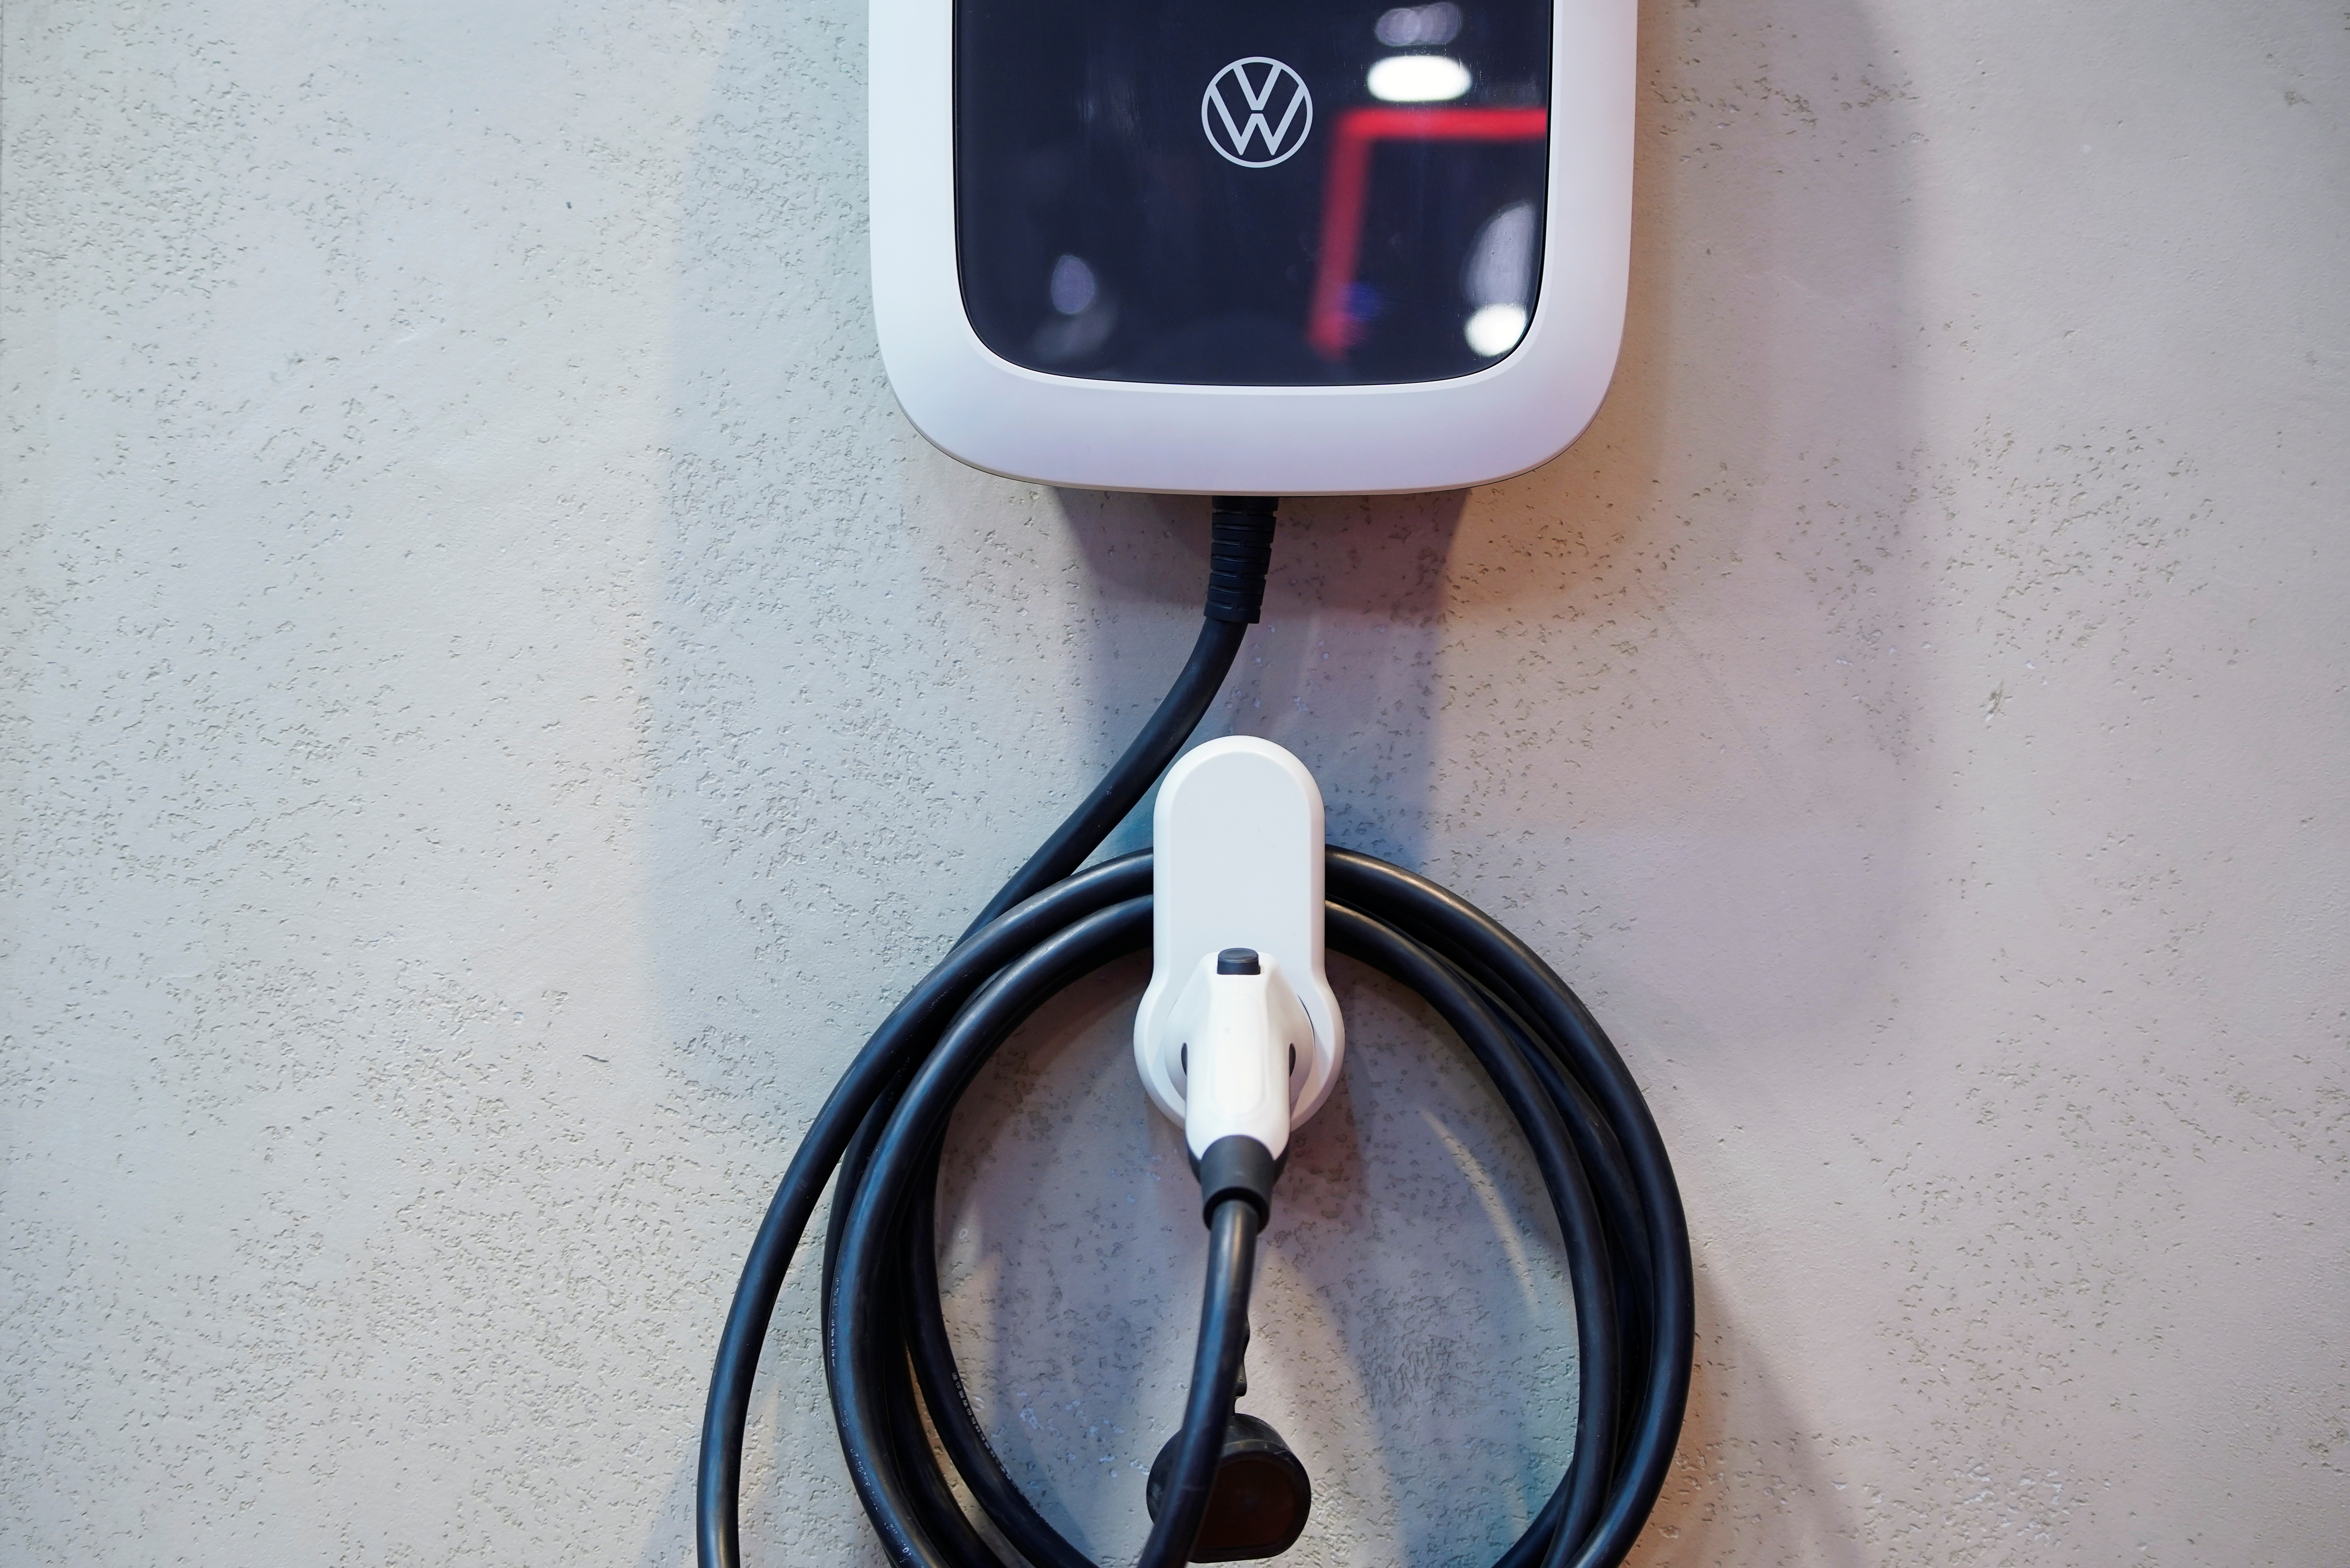 A Volkswagen electric vehicle (EV) charging point is seen during a media day for the Auto Shanghai show in Shanghai, China April 20, 2021. REUTERS/Aly Song